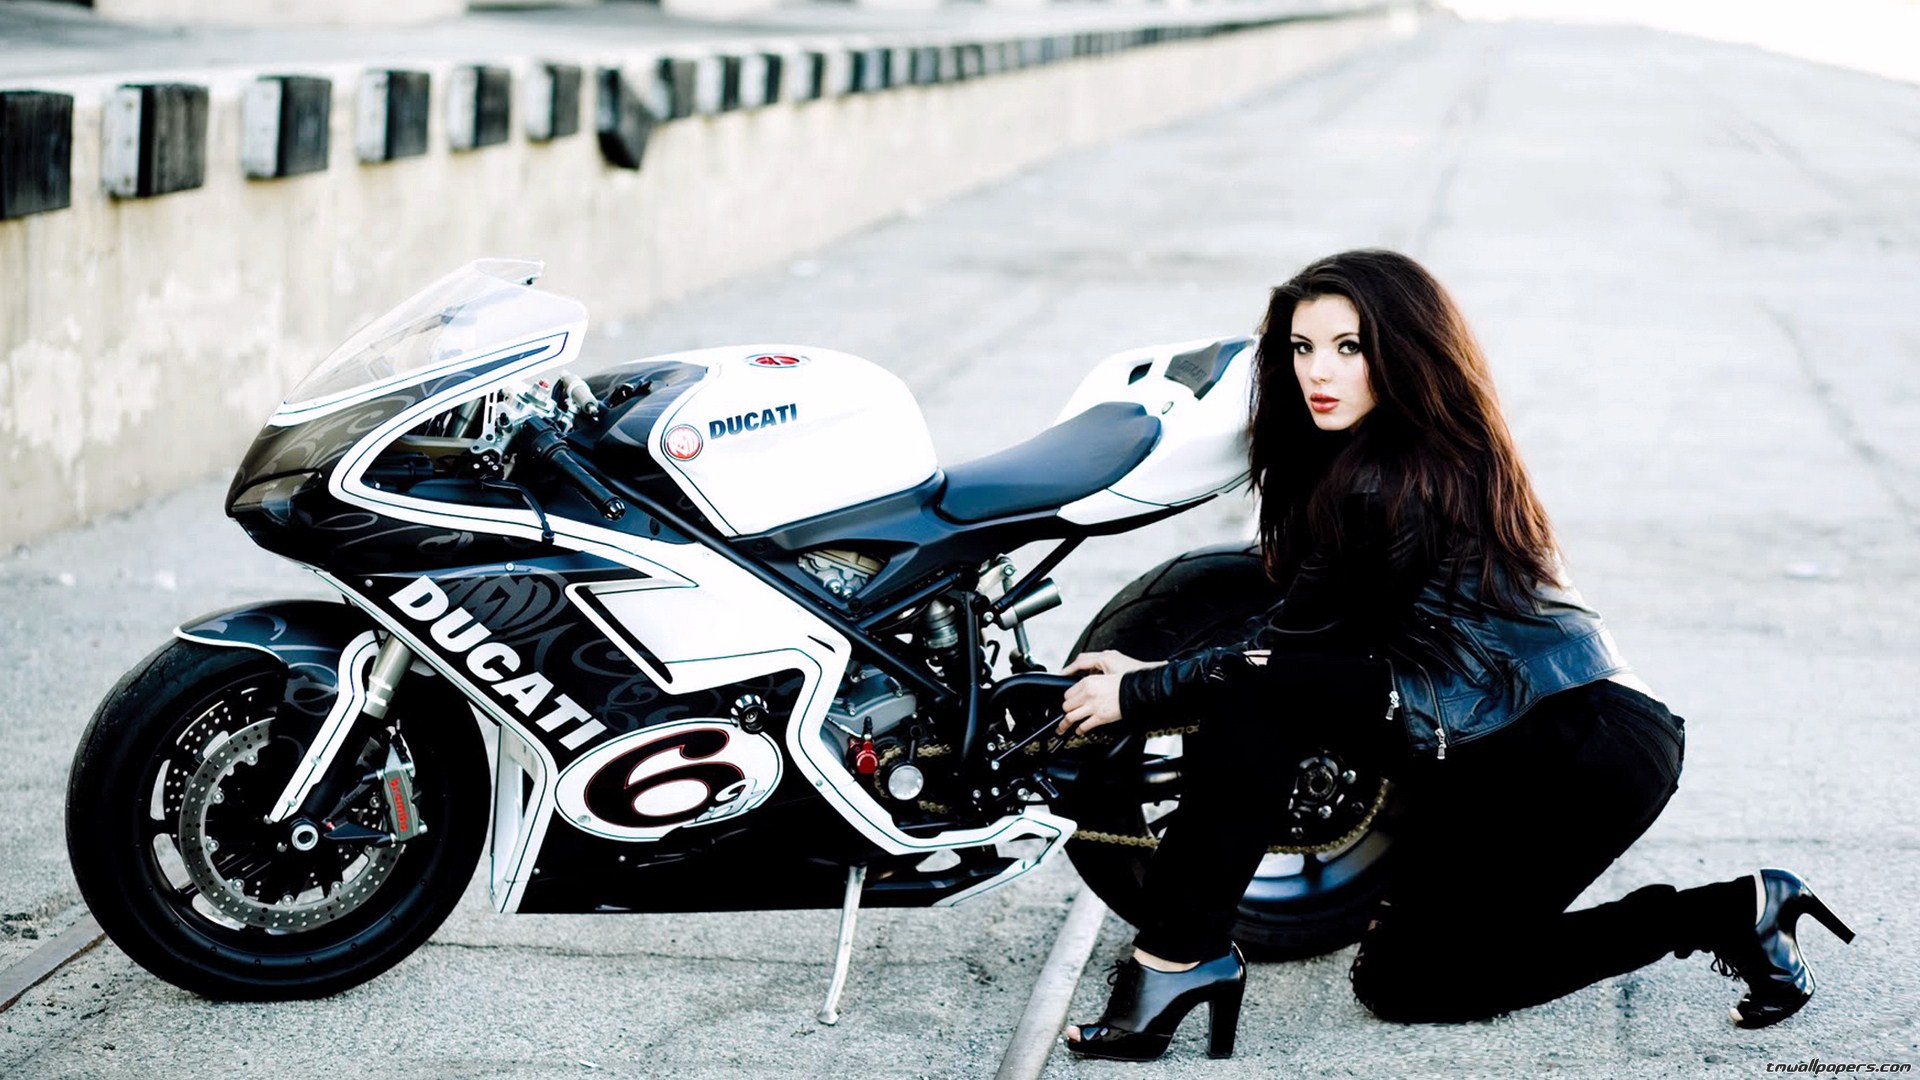 motorcycle girls wallpaper funny photos pictures images 2013 1920x1080